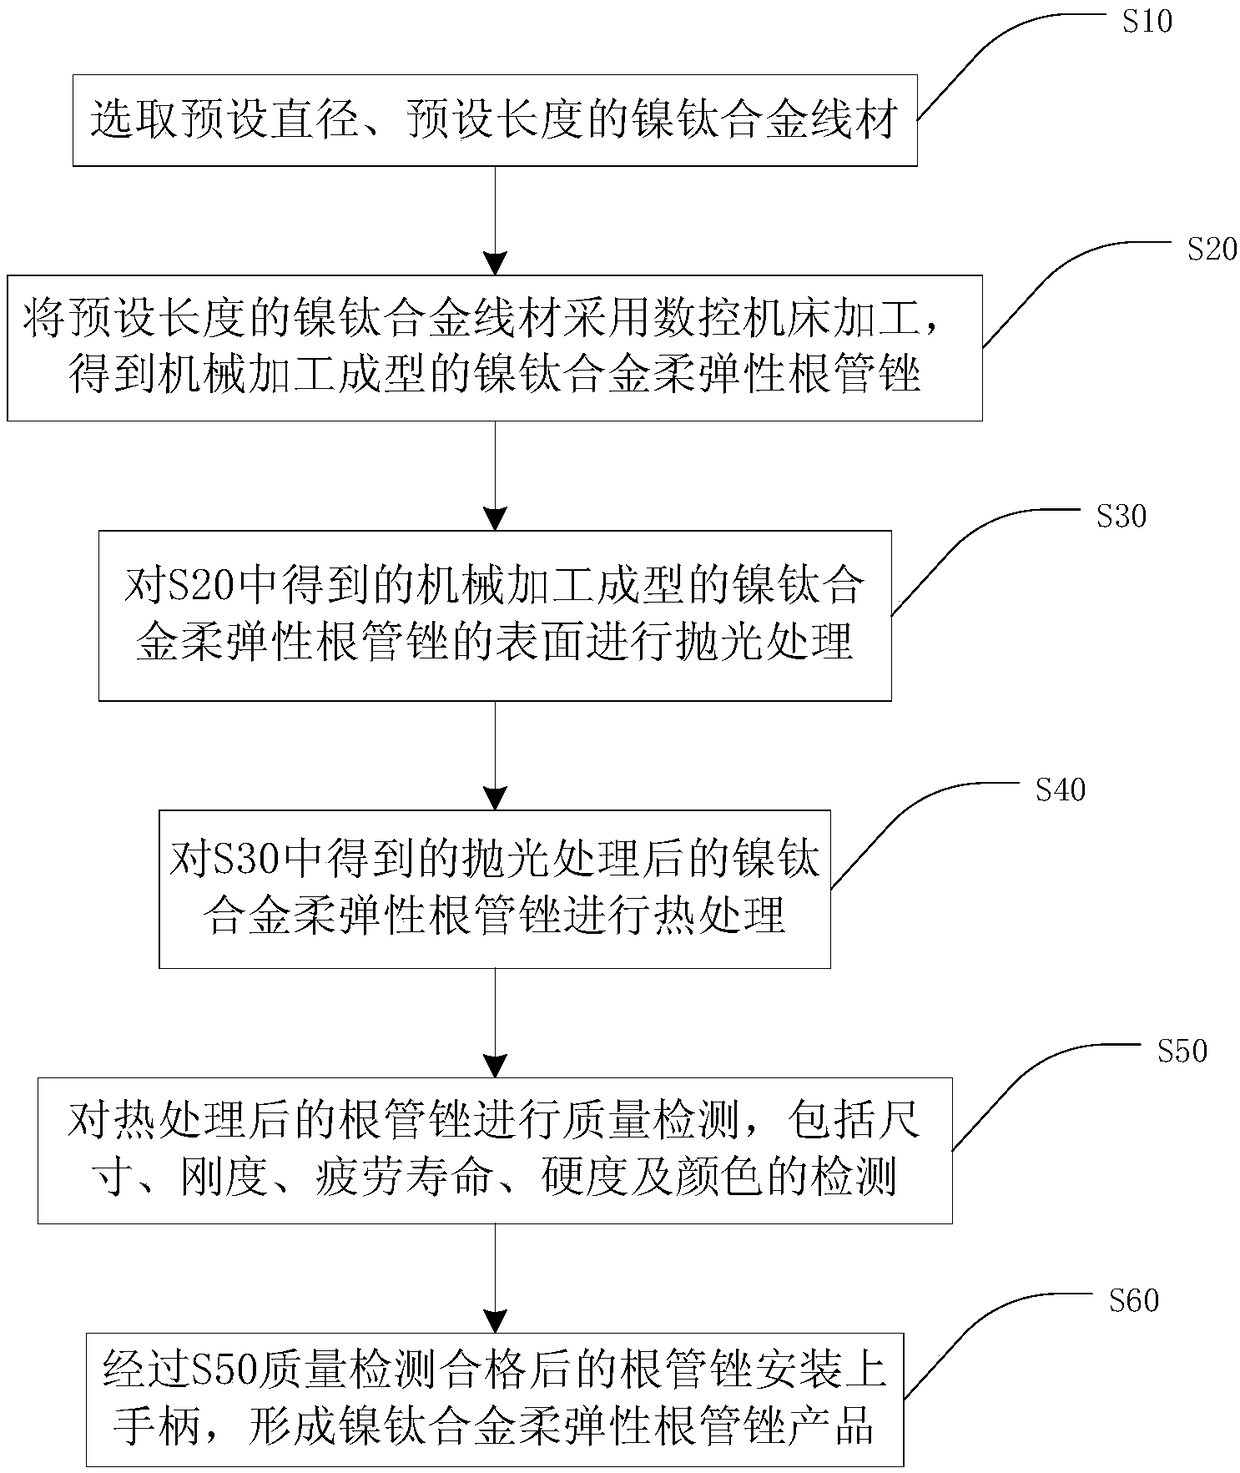 Preparation method of nickel-titanium alloy flexible and elastic root canal file